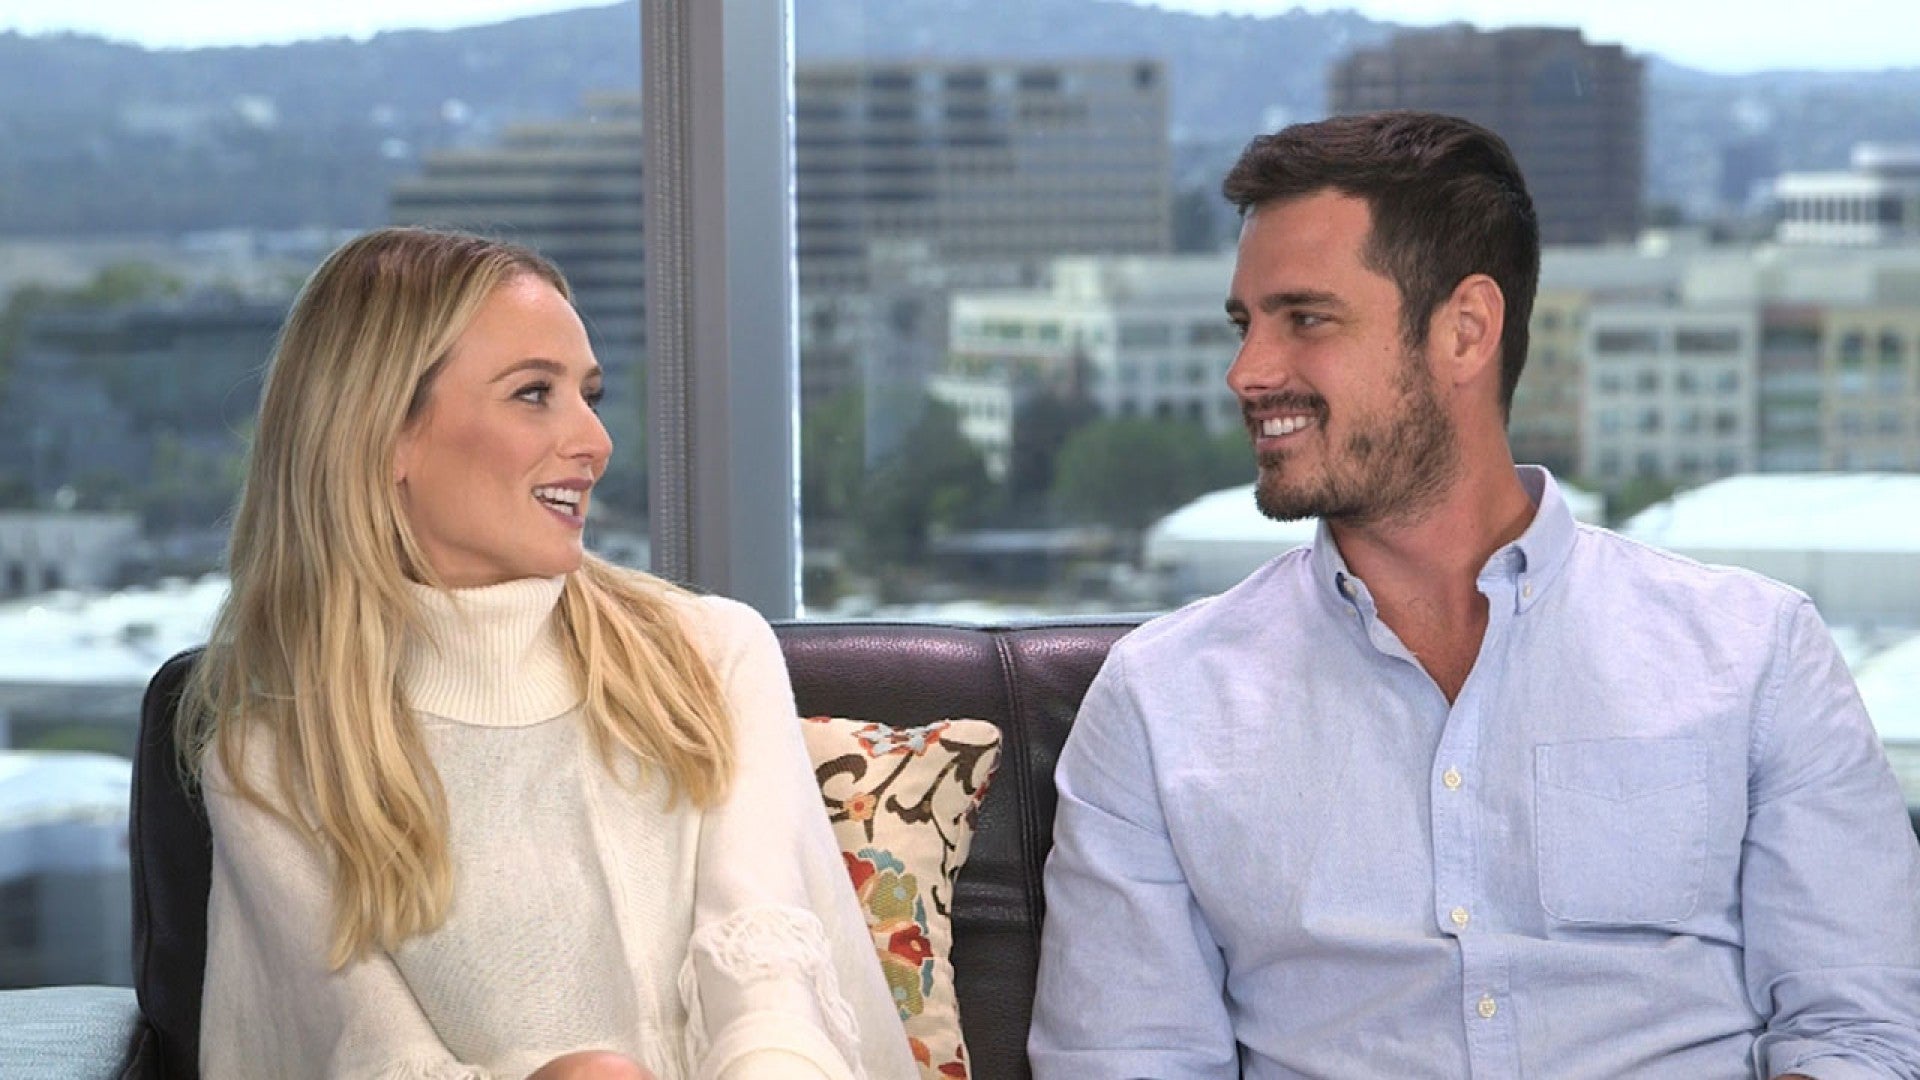 EXCLUSIVE: Ben Higgins and Lauren Bushnell on a 'Happily Ever After ...